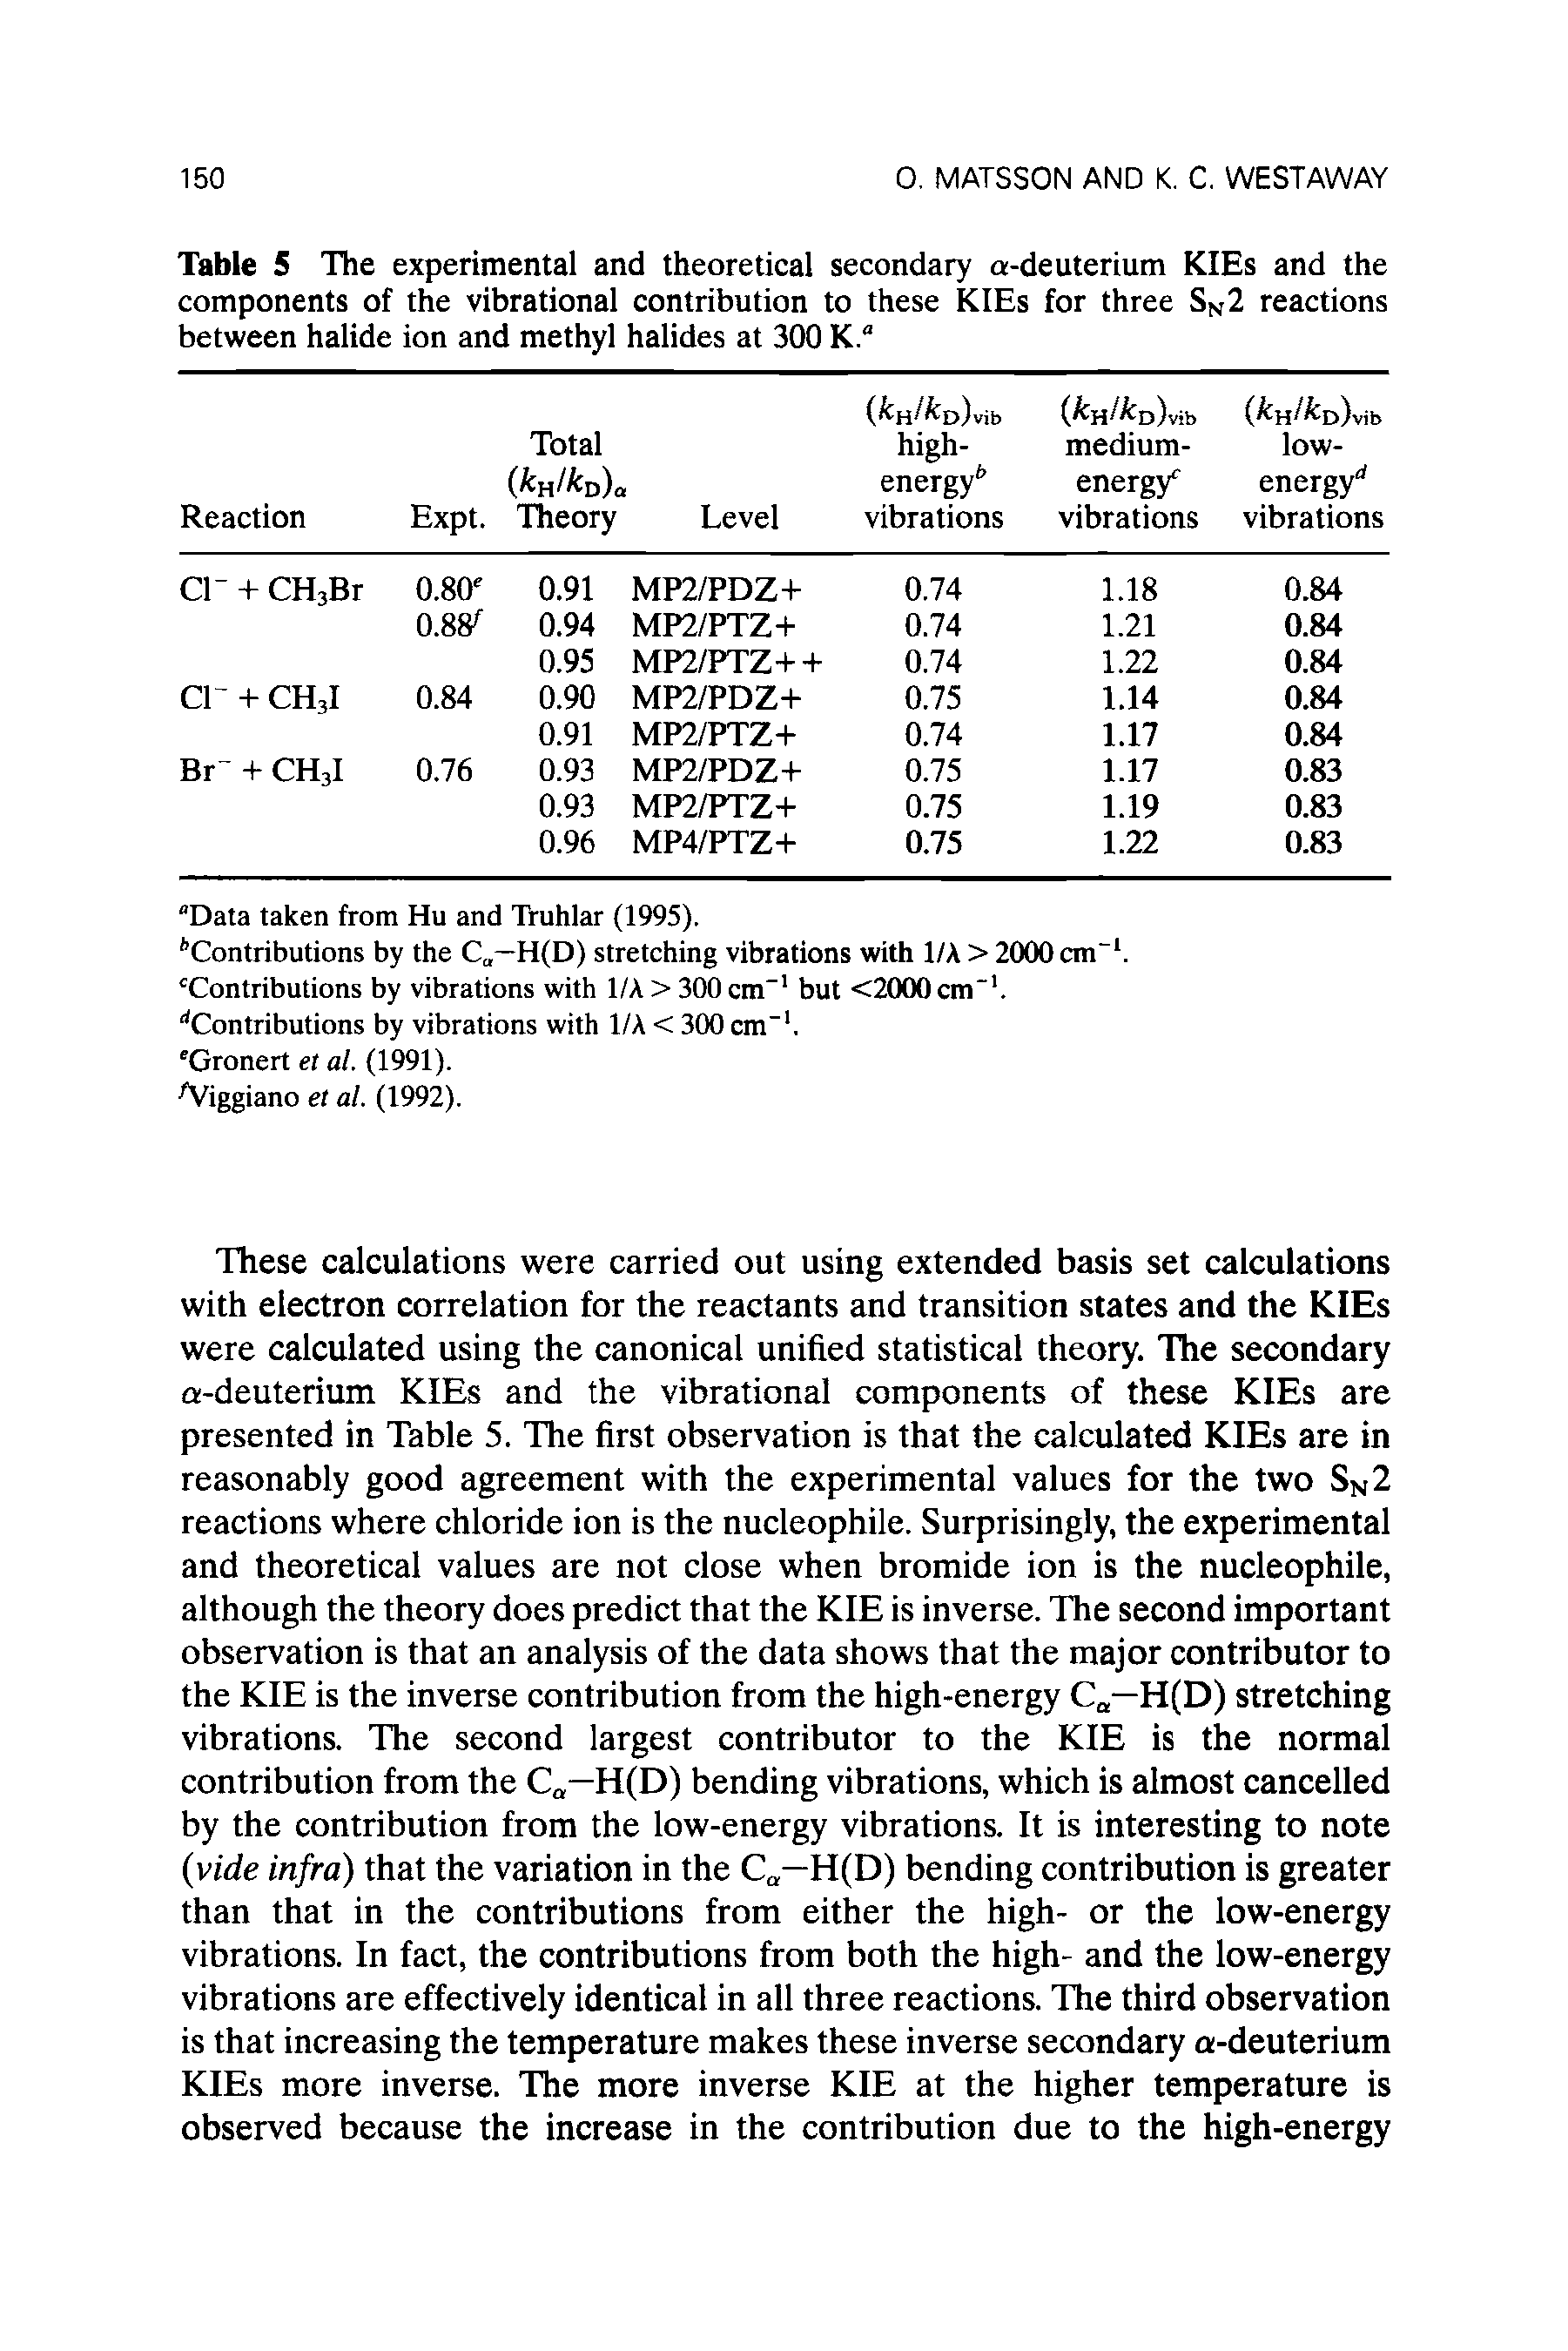 Table 5 The experimental and theoretical secondary a-deuterium KIEs and the components of the vibrational contribution to these KIEs for three SN2 reactions between halide ion and methyl halides at 300 K."...